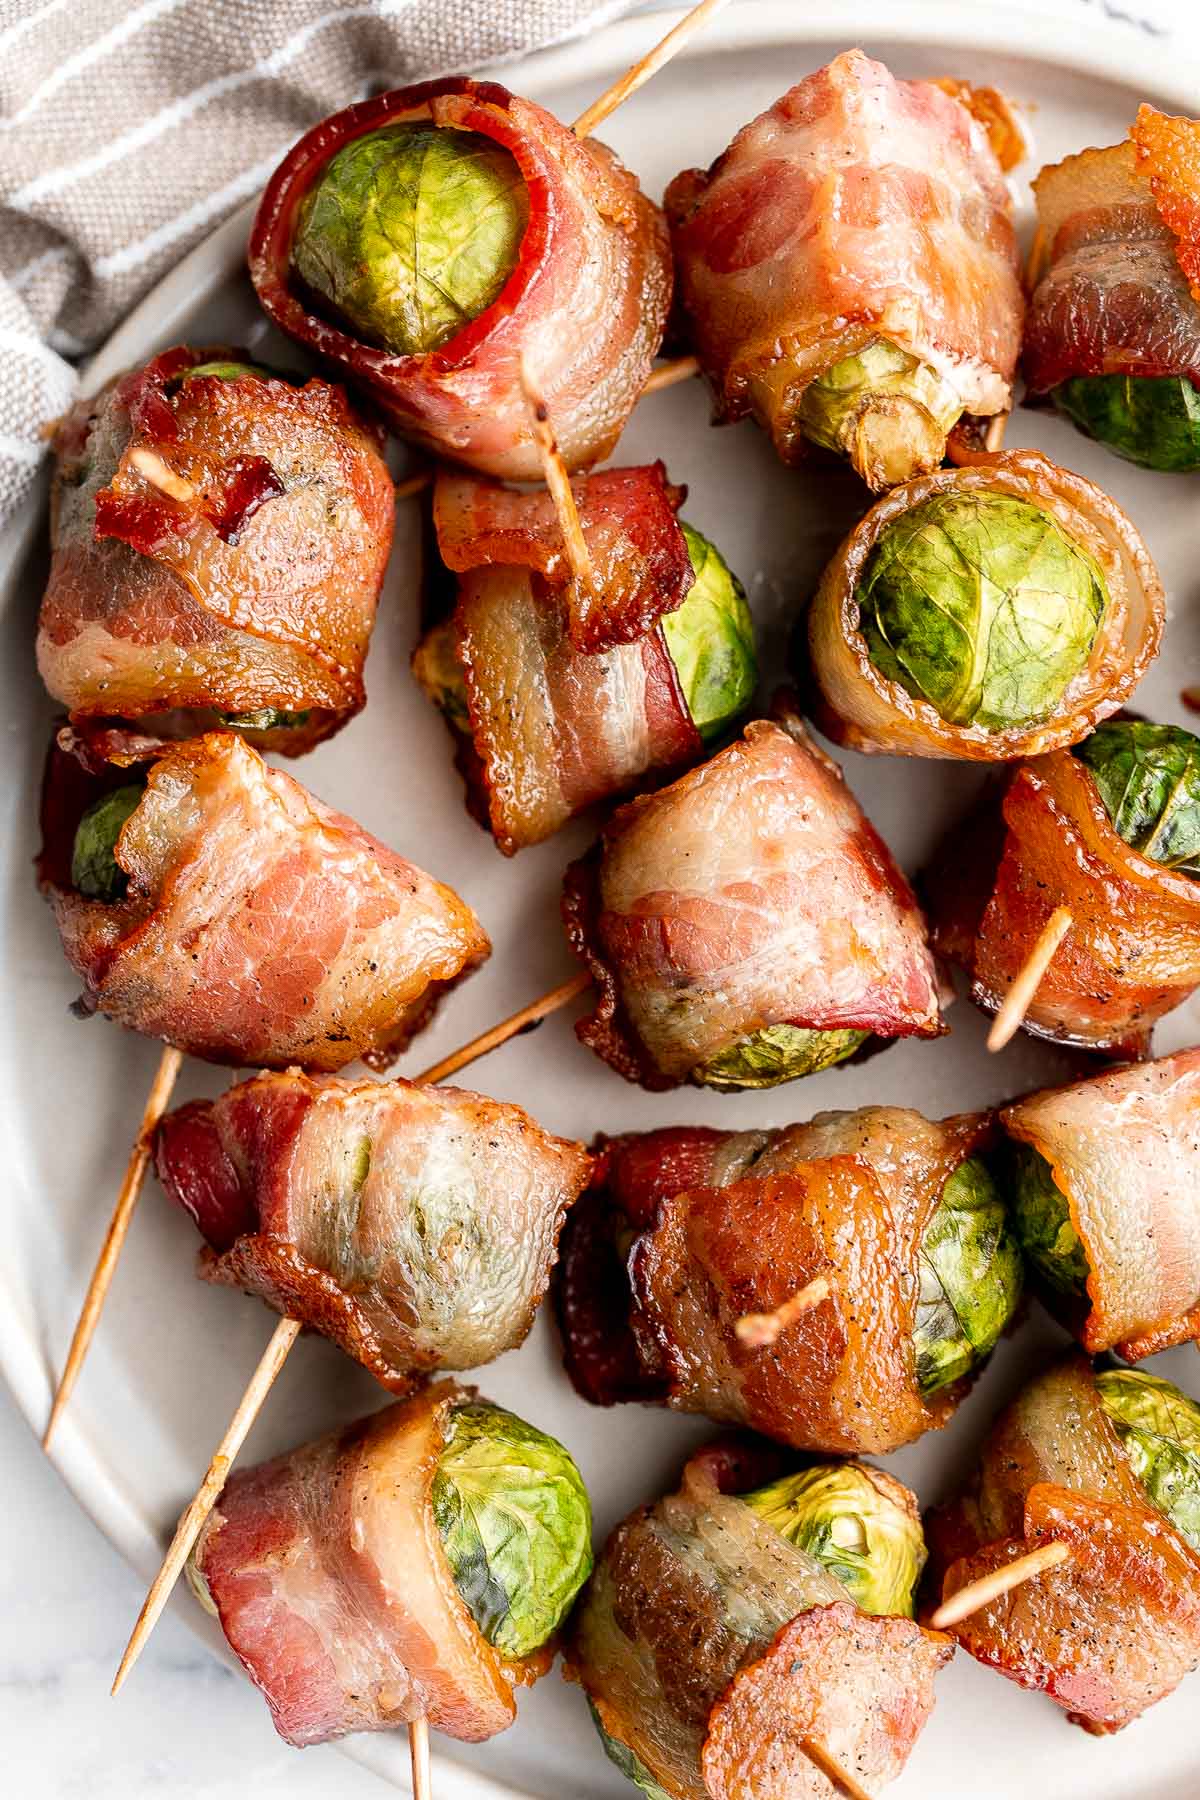 Bacon wrapped brussels sprouts are the sweet, savory, and salty appetizer that you need at your next holiday gathering this fall. Simple and easy to make. | aheadofthyme.com